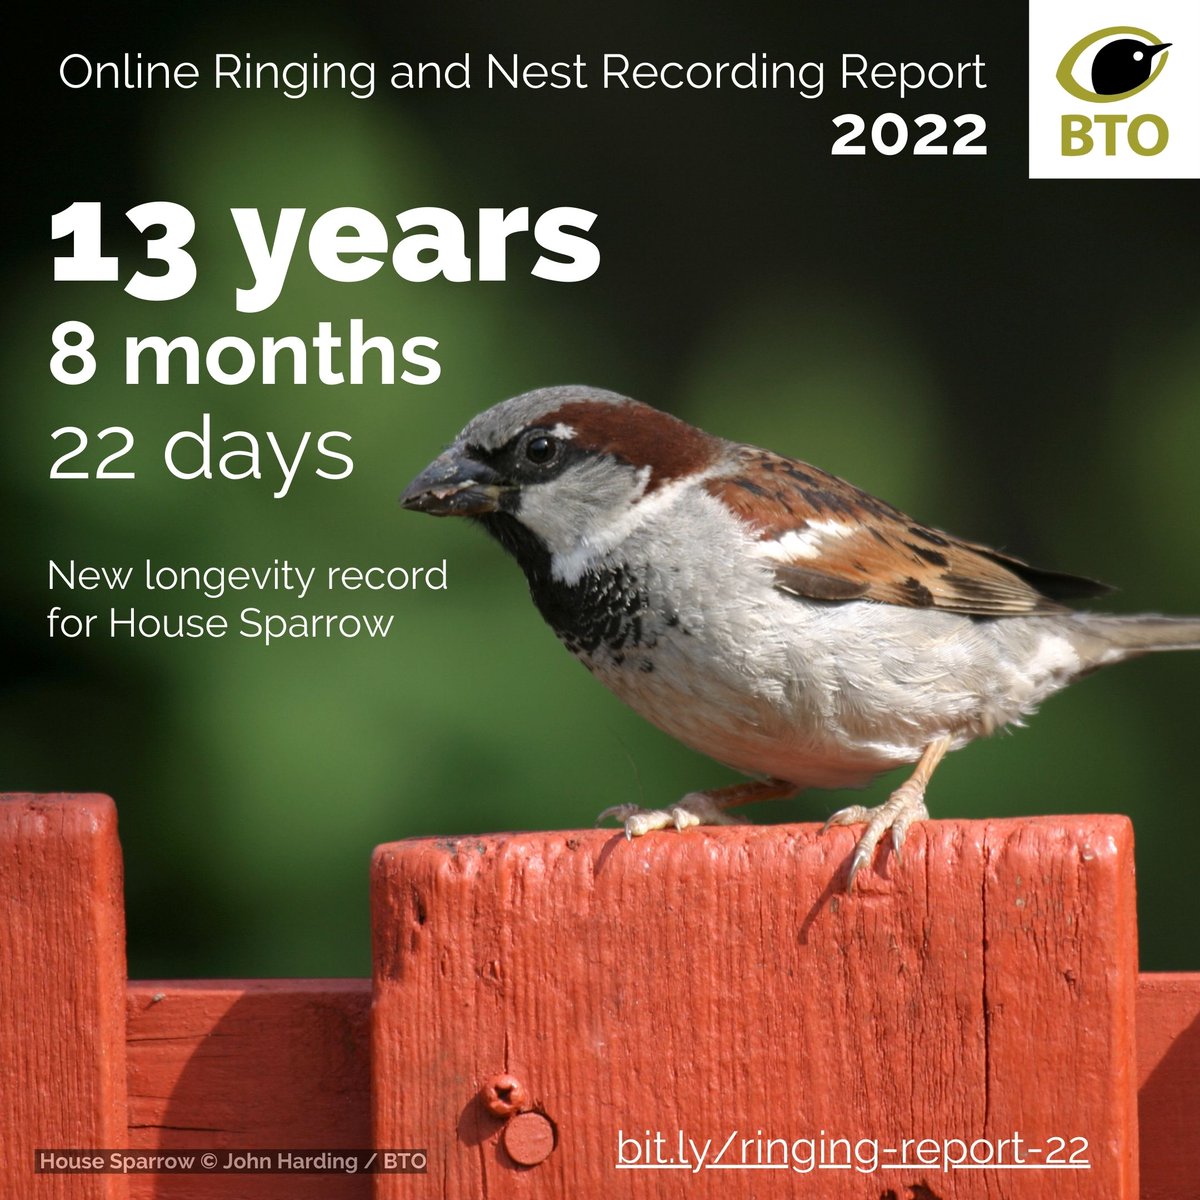 Another record breaker from 2022 - a colour ringed House Sparrow was seen again in Caerphilly after 13 years! With a typical lifespan of 3 years, 13 is a ripe old age! Explore more longevity records in the 2022 Ringing Report👉bit.ly/ringing-report… #BirdRinging #GardenBirds